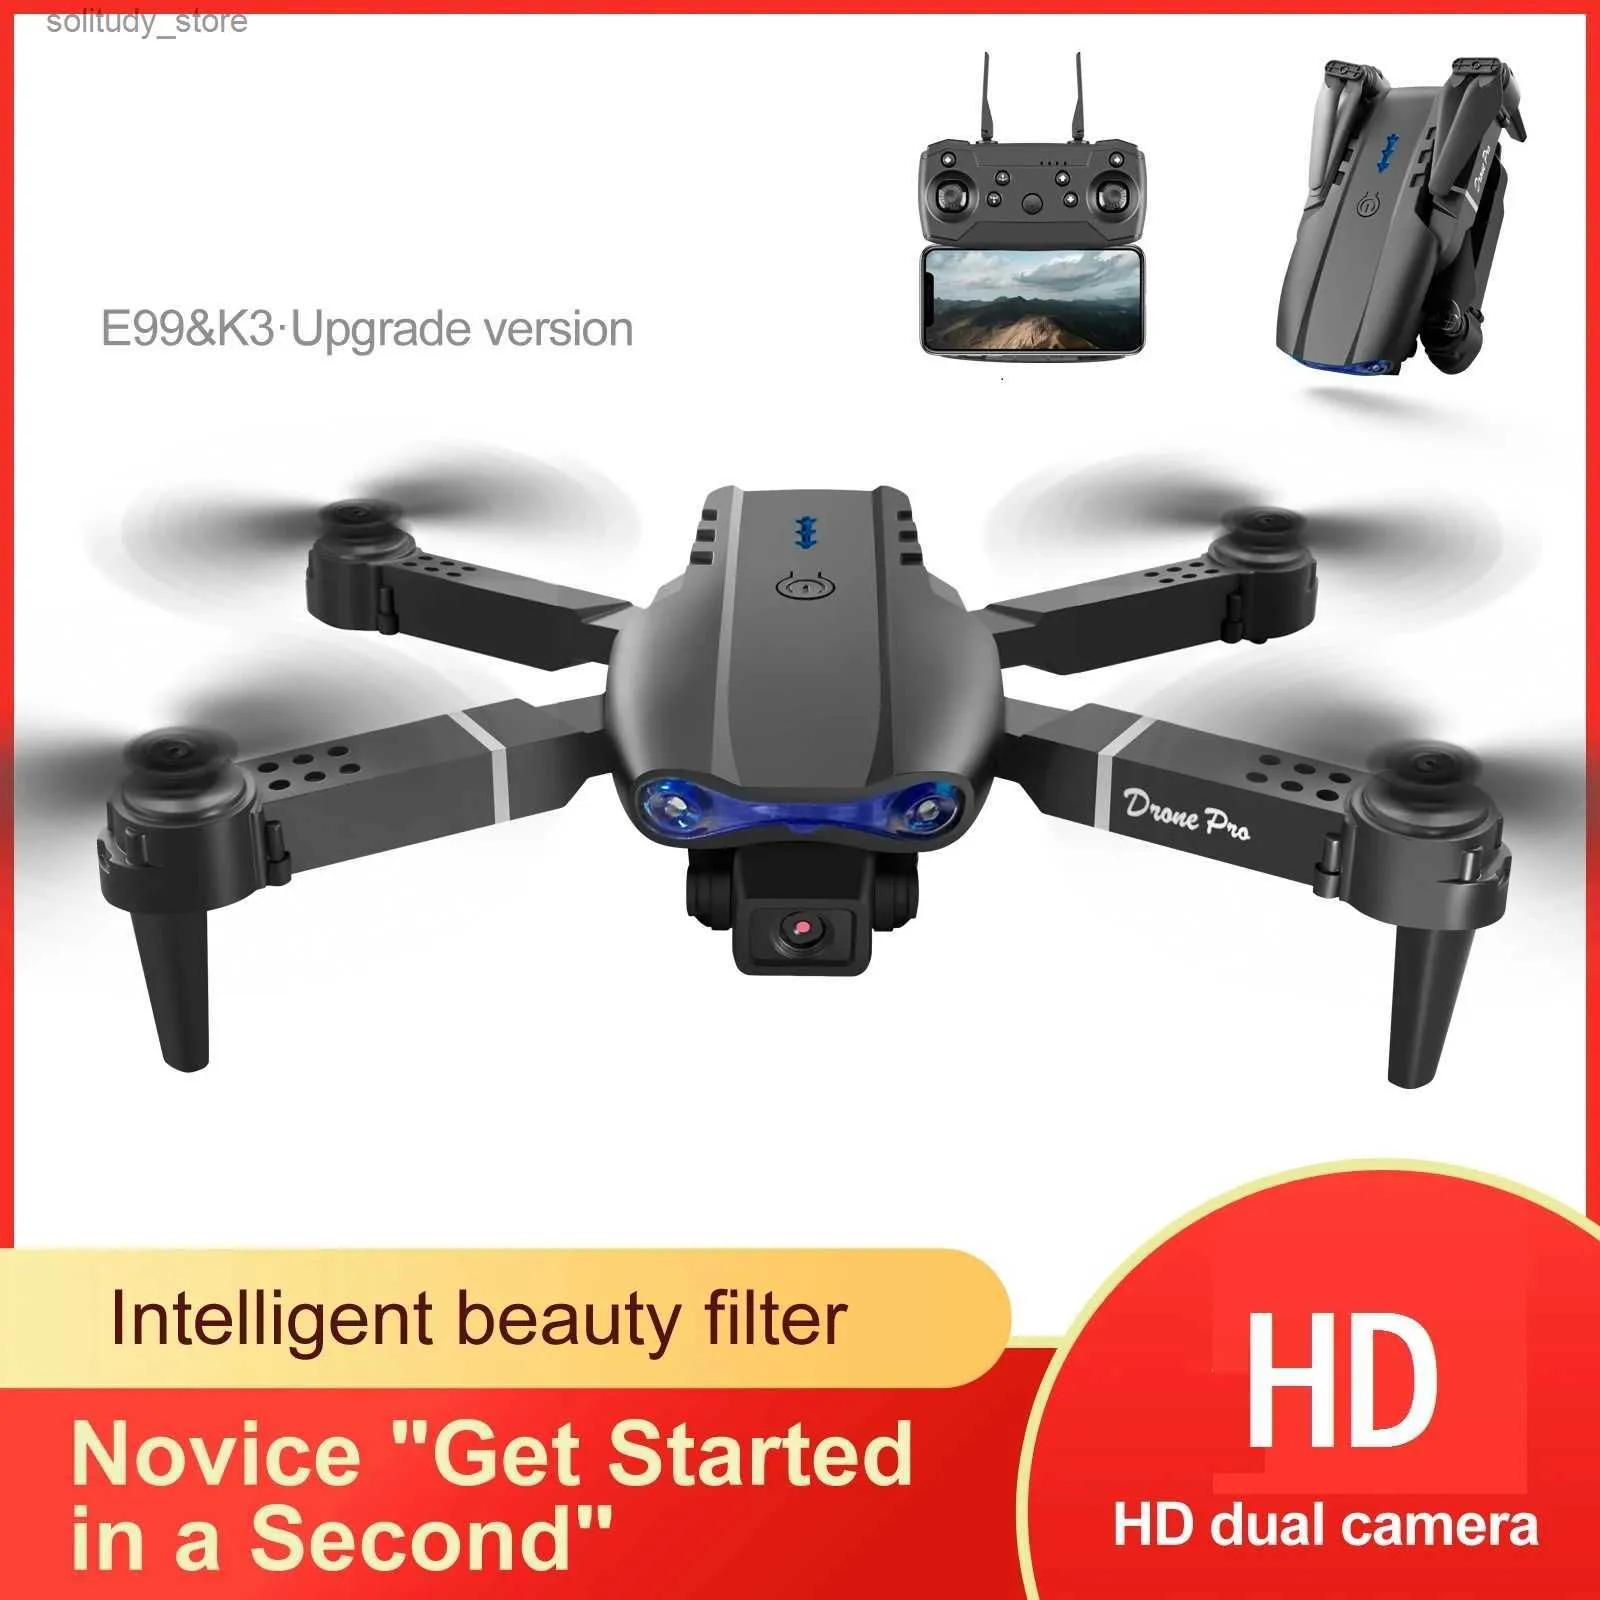 Drones E99 Pro Drone Foldable Quadcopter Aerial Photography RC Helicopters Professional WIFI FPV HD Dual Camera Mini Dron Toys Q240308